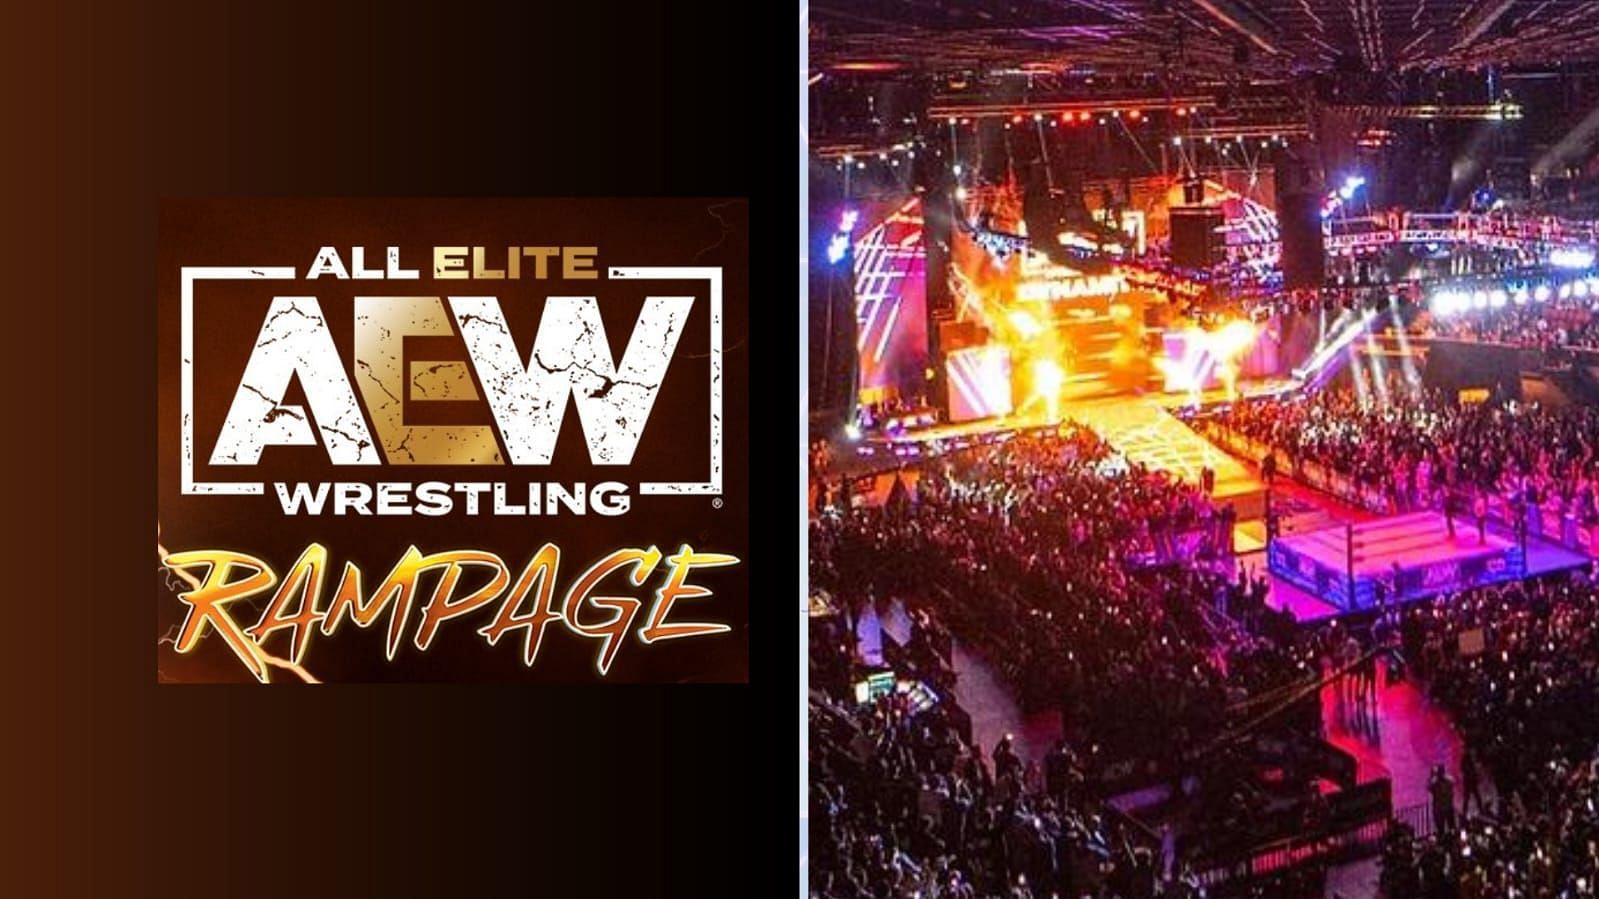 AEW Rampage had a huge main event this week